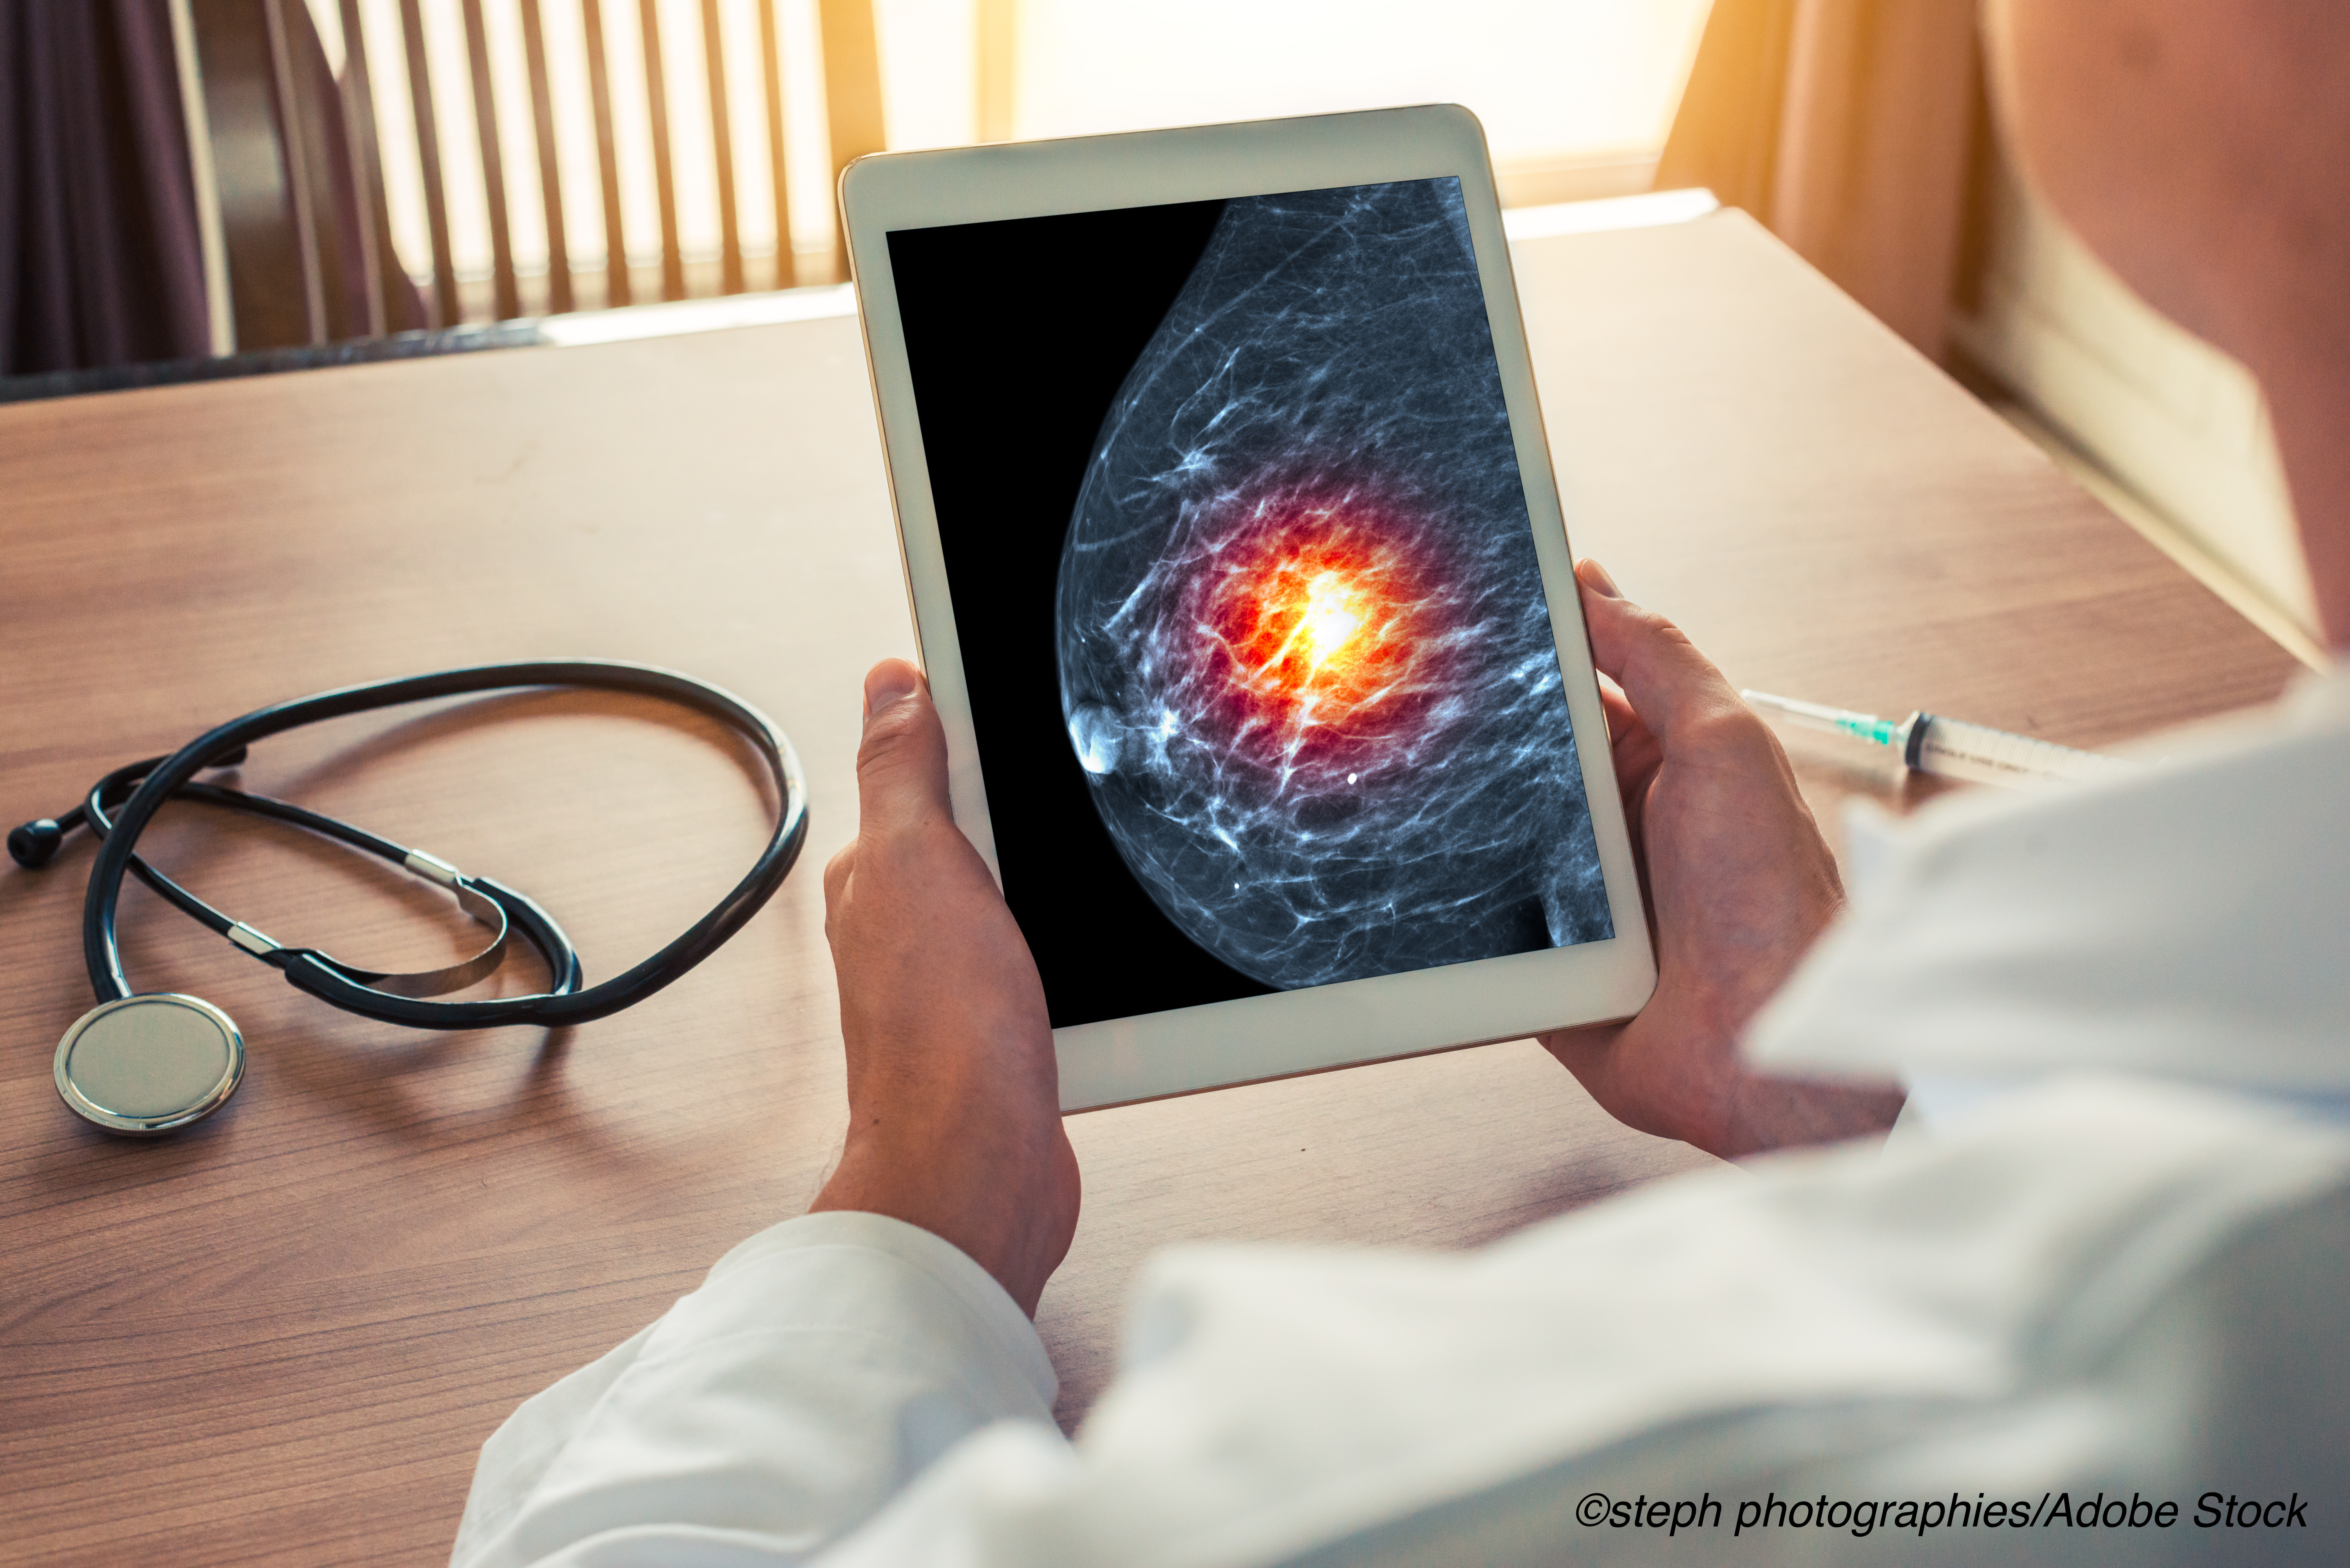 PD-1 Inhibitor Did Not Improve OS Compared to Chemo in Triple-Negative Breast Cancer